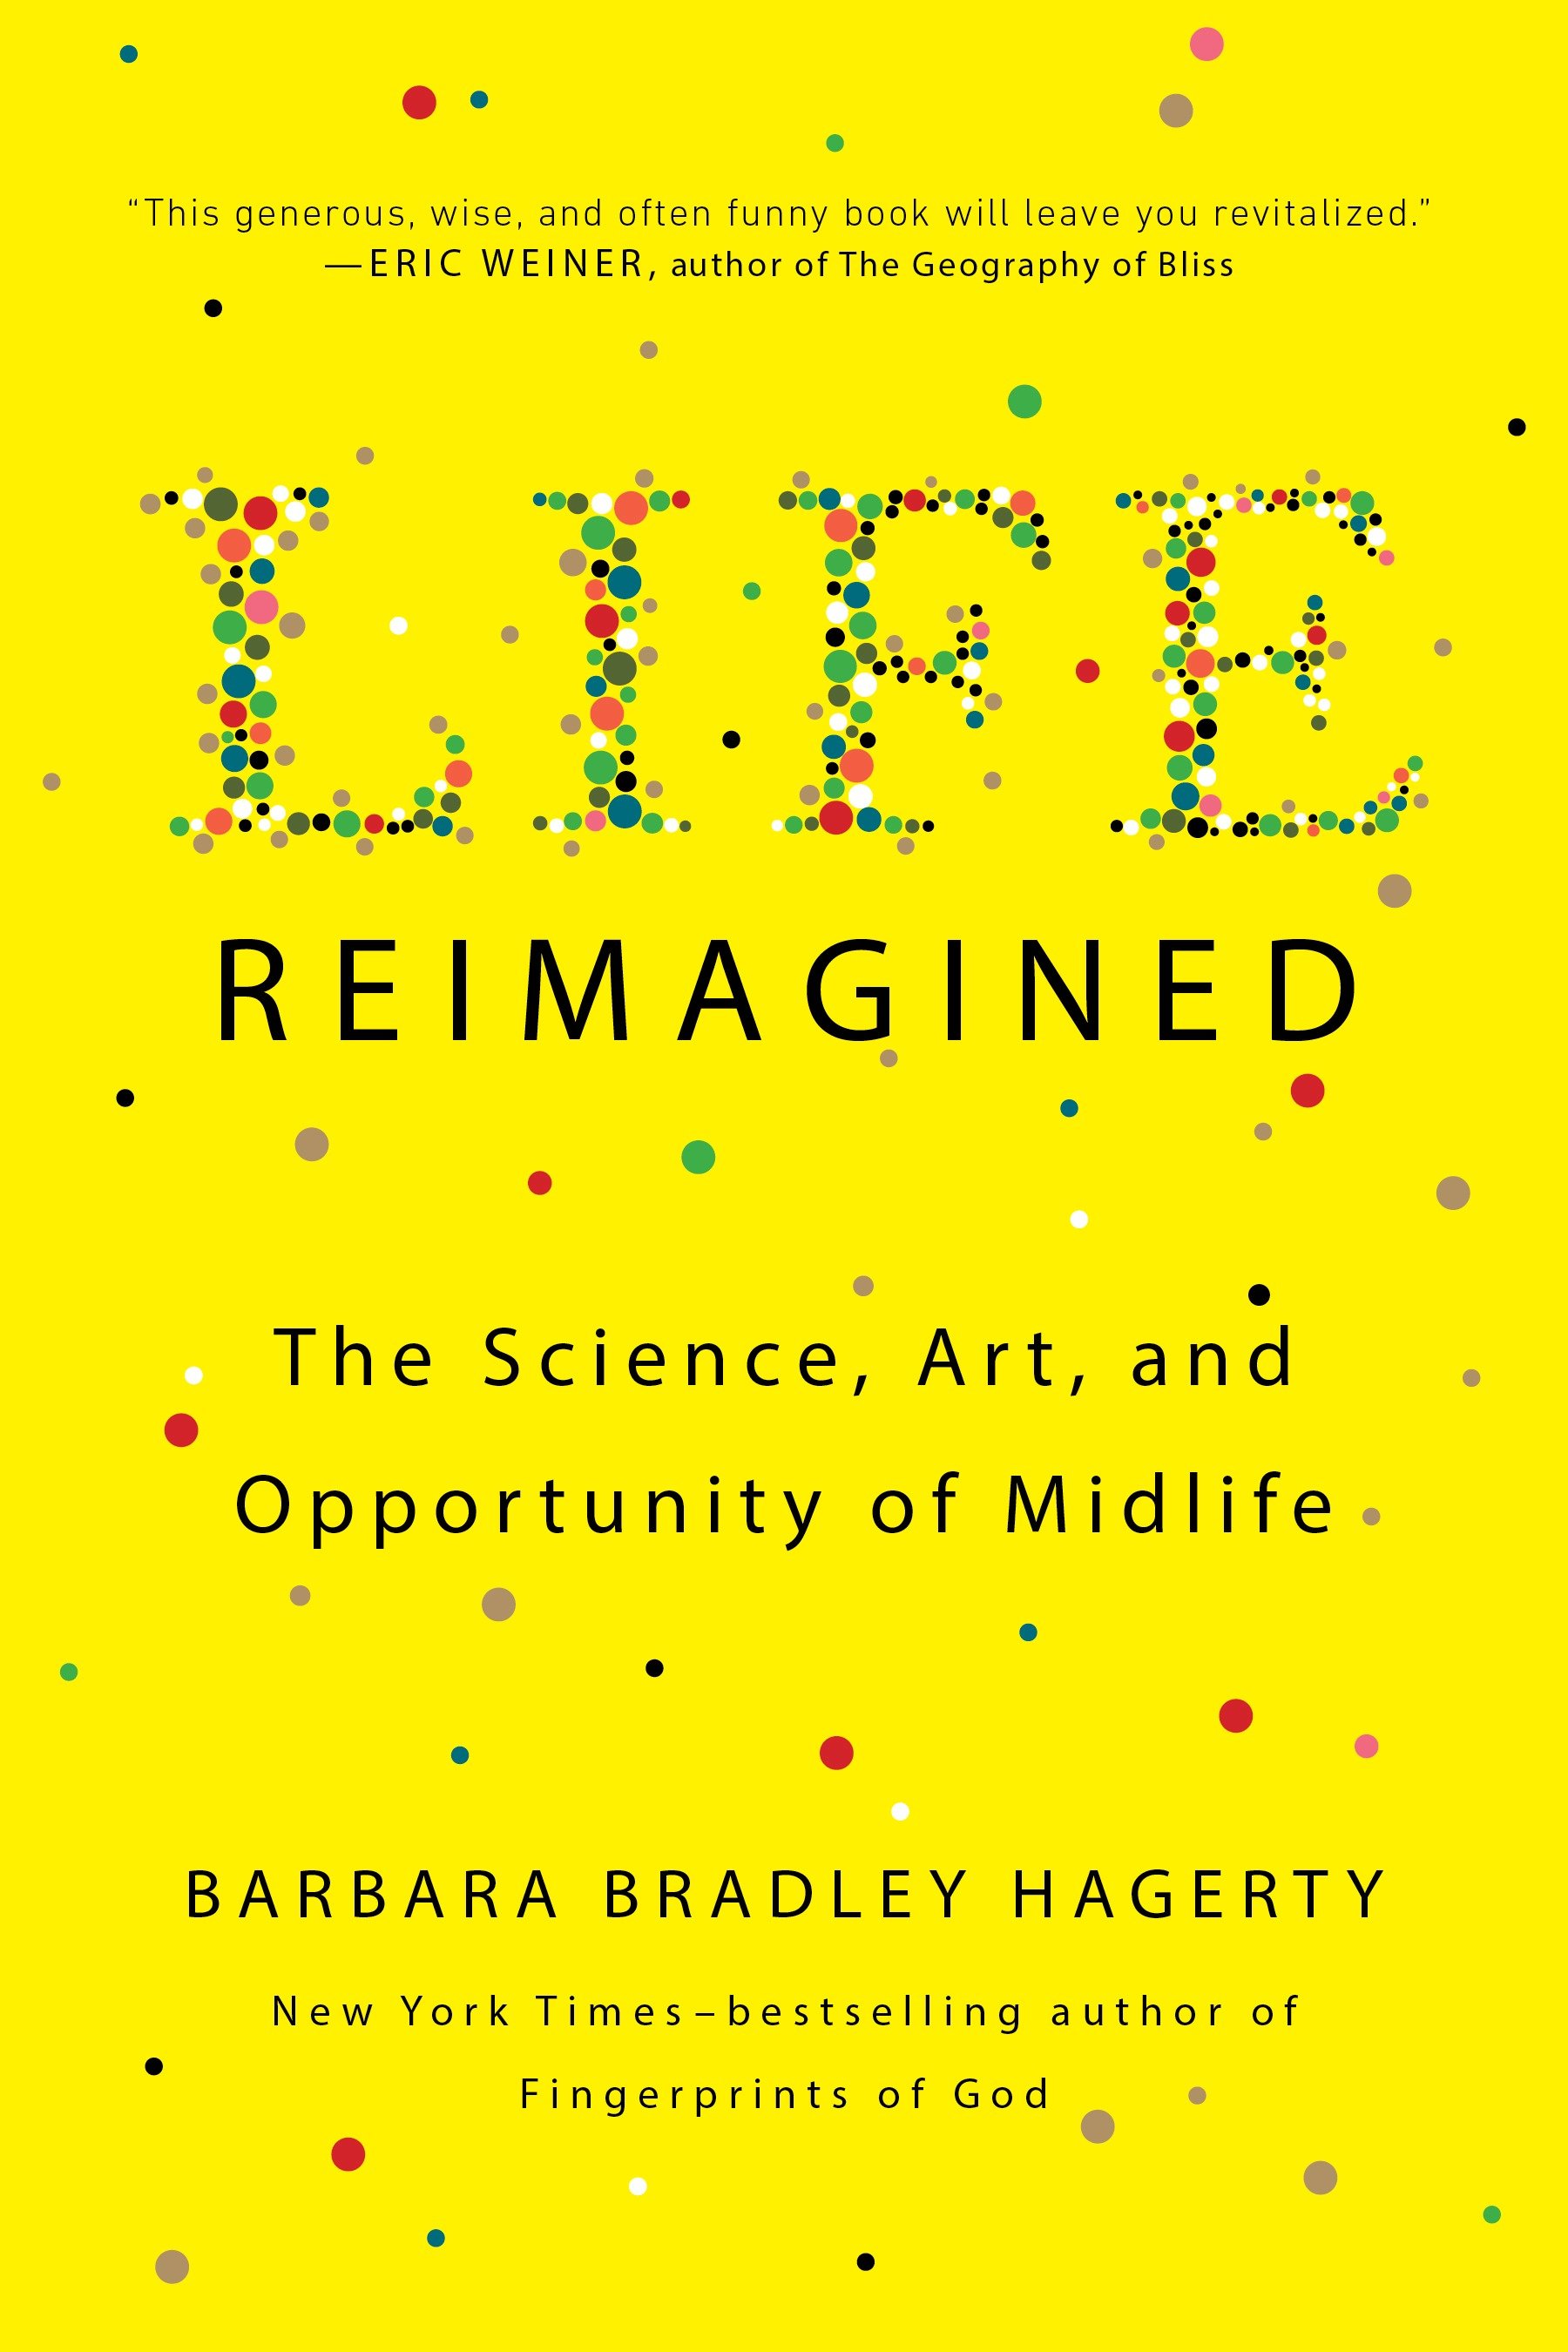 Image de couverture de Life Reimagined [electronic resource] : The Science, Art, and Opportunity of Midlife